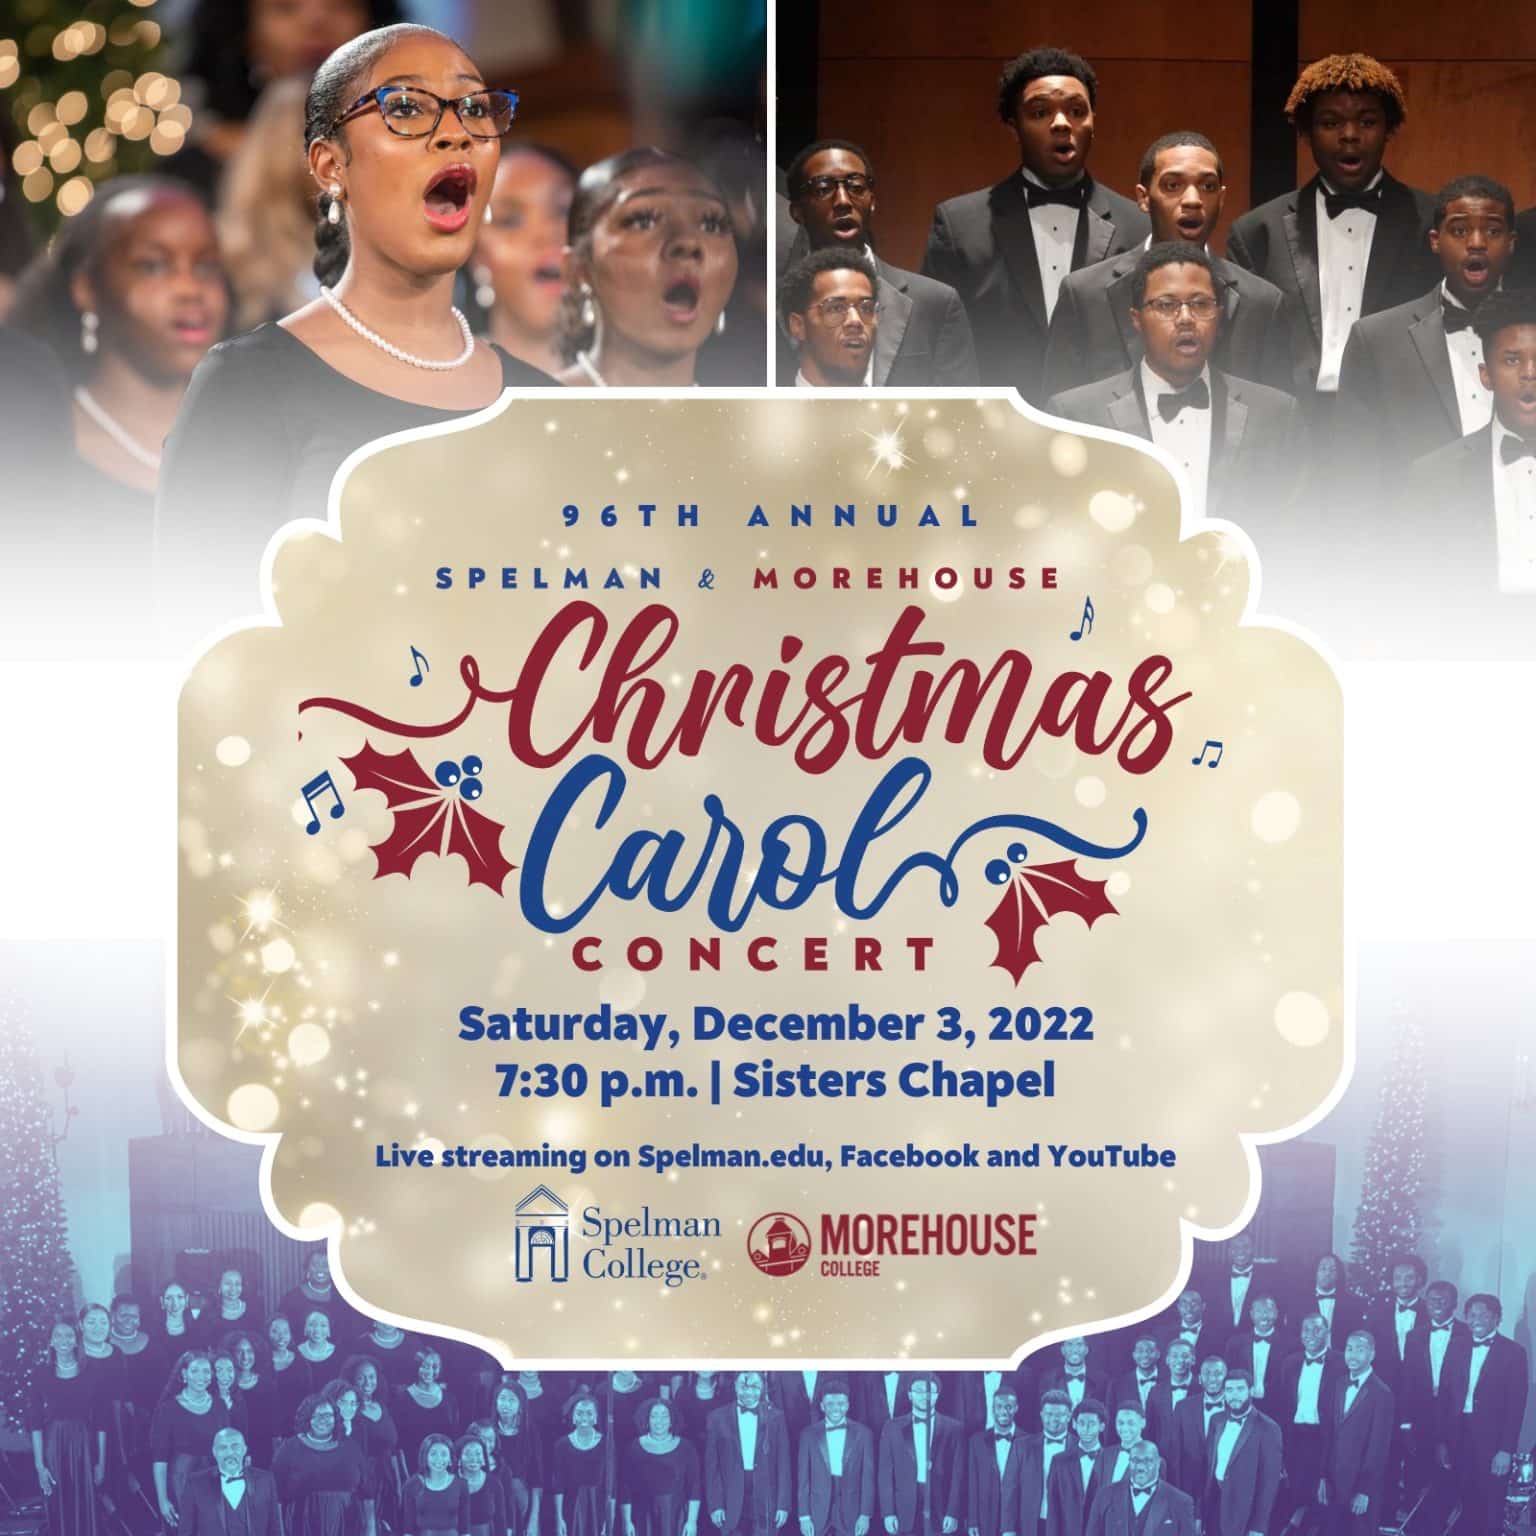 Deck the Halls at the 96th Annual SpelmanMorehouse Christmas Carol